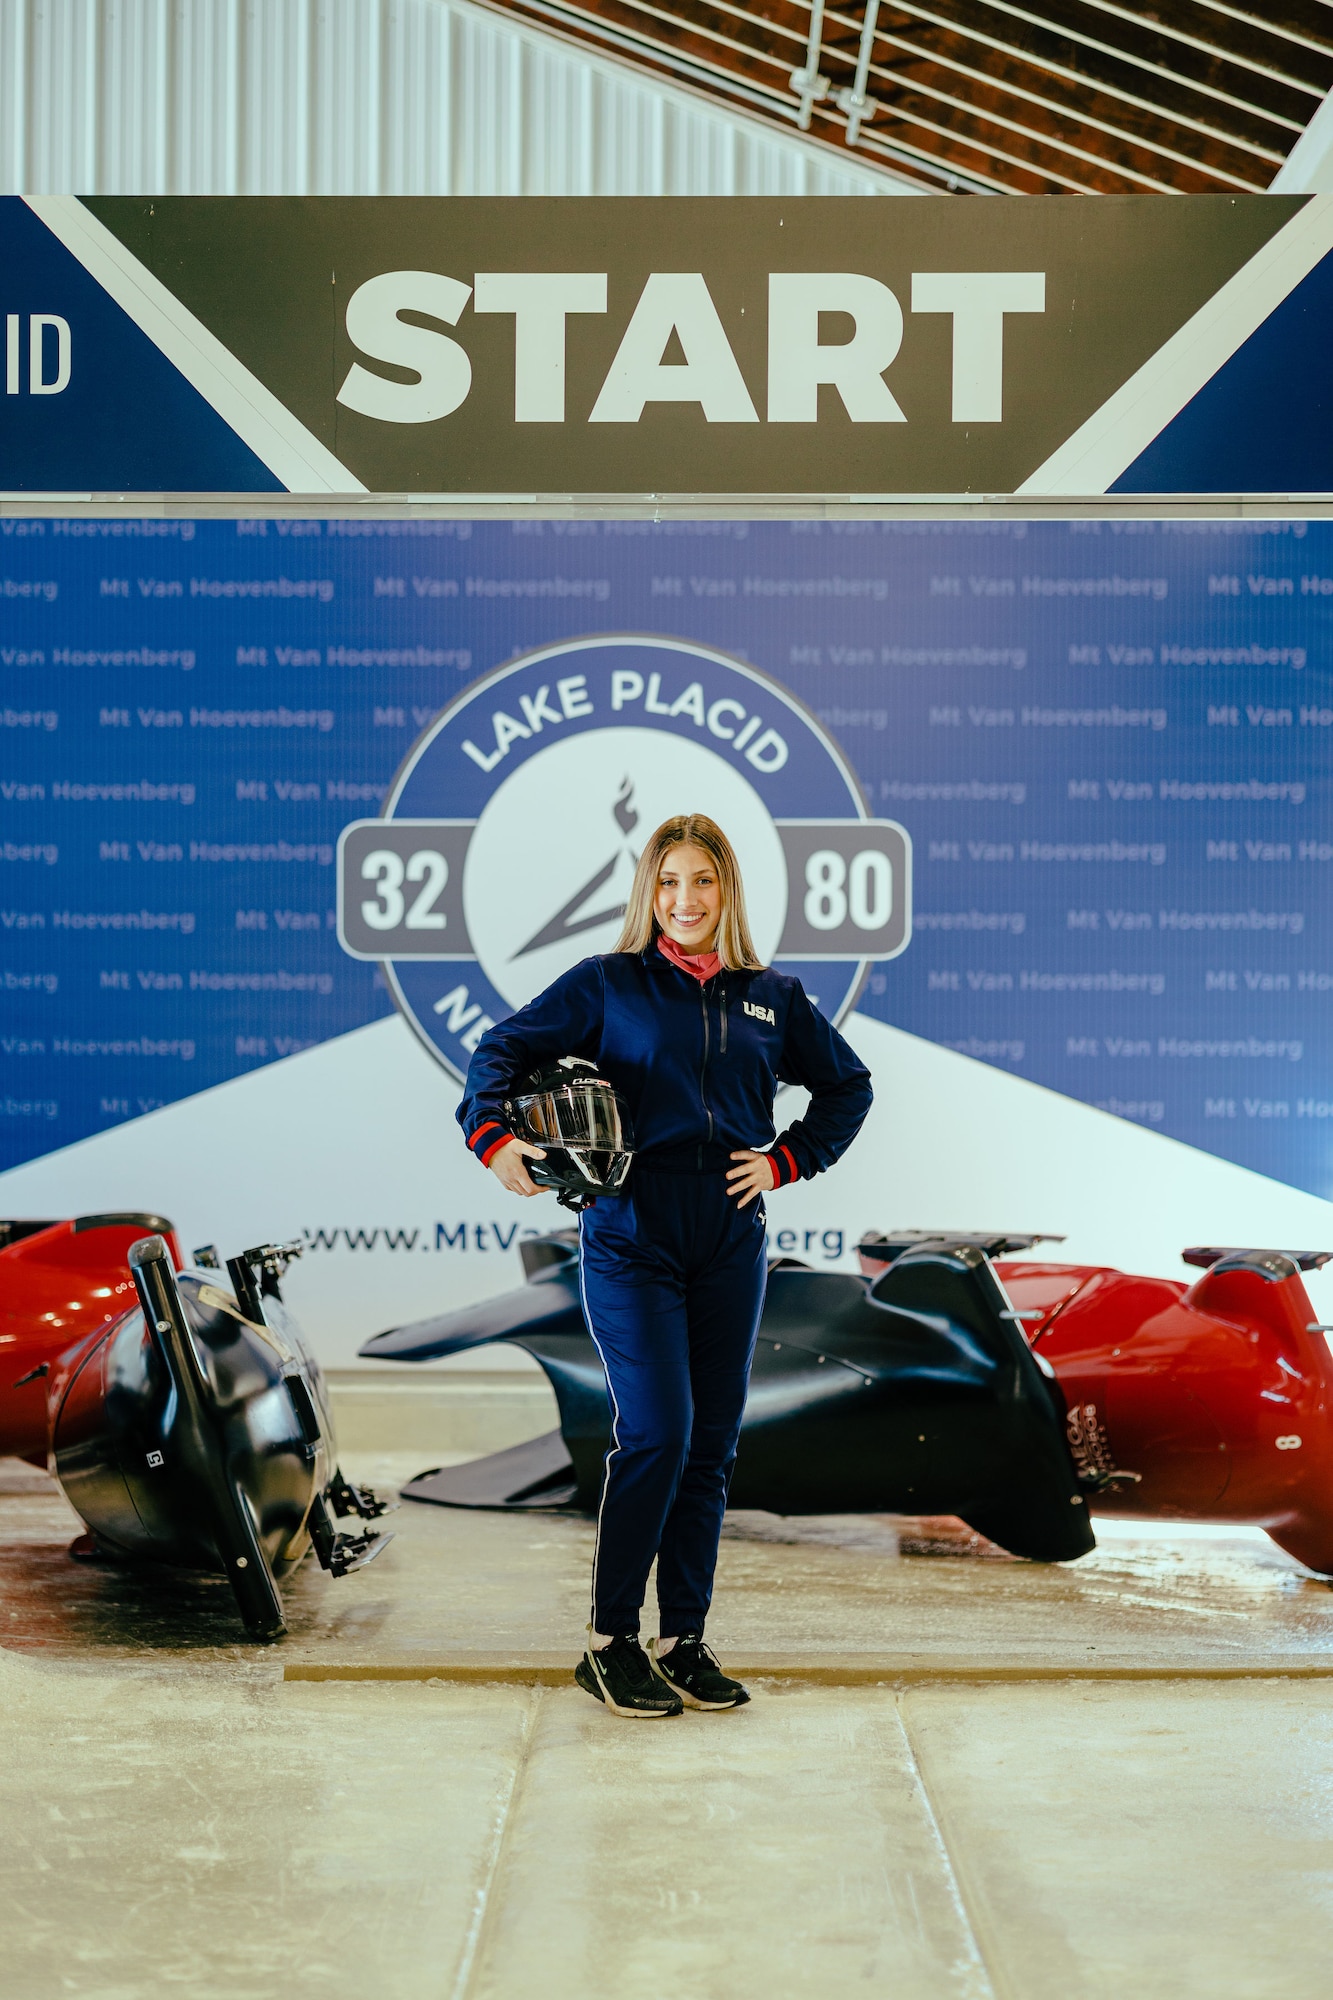 Emily Bradley pictured at Lake Placid, New York during the International Bobsleigh and Skeleton Federation Development Camp in March 2022. The black monobob is her personal sled she trains with during the runs down the track. This IBSF camp visit was her first.